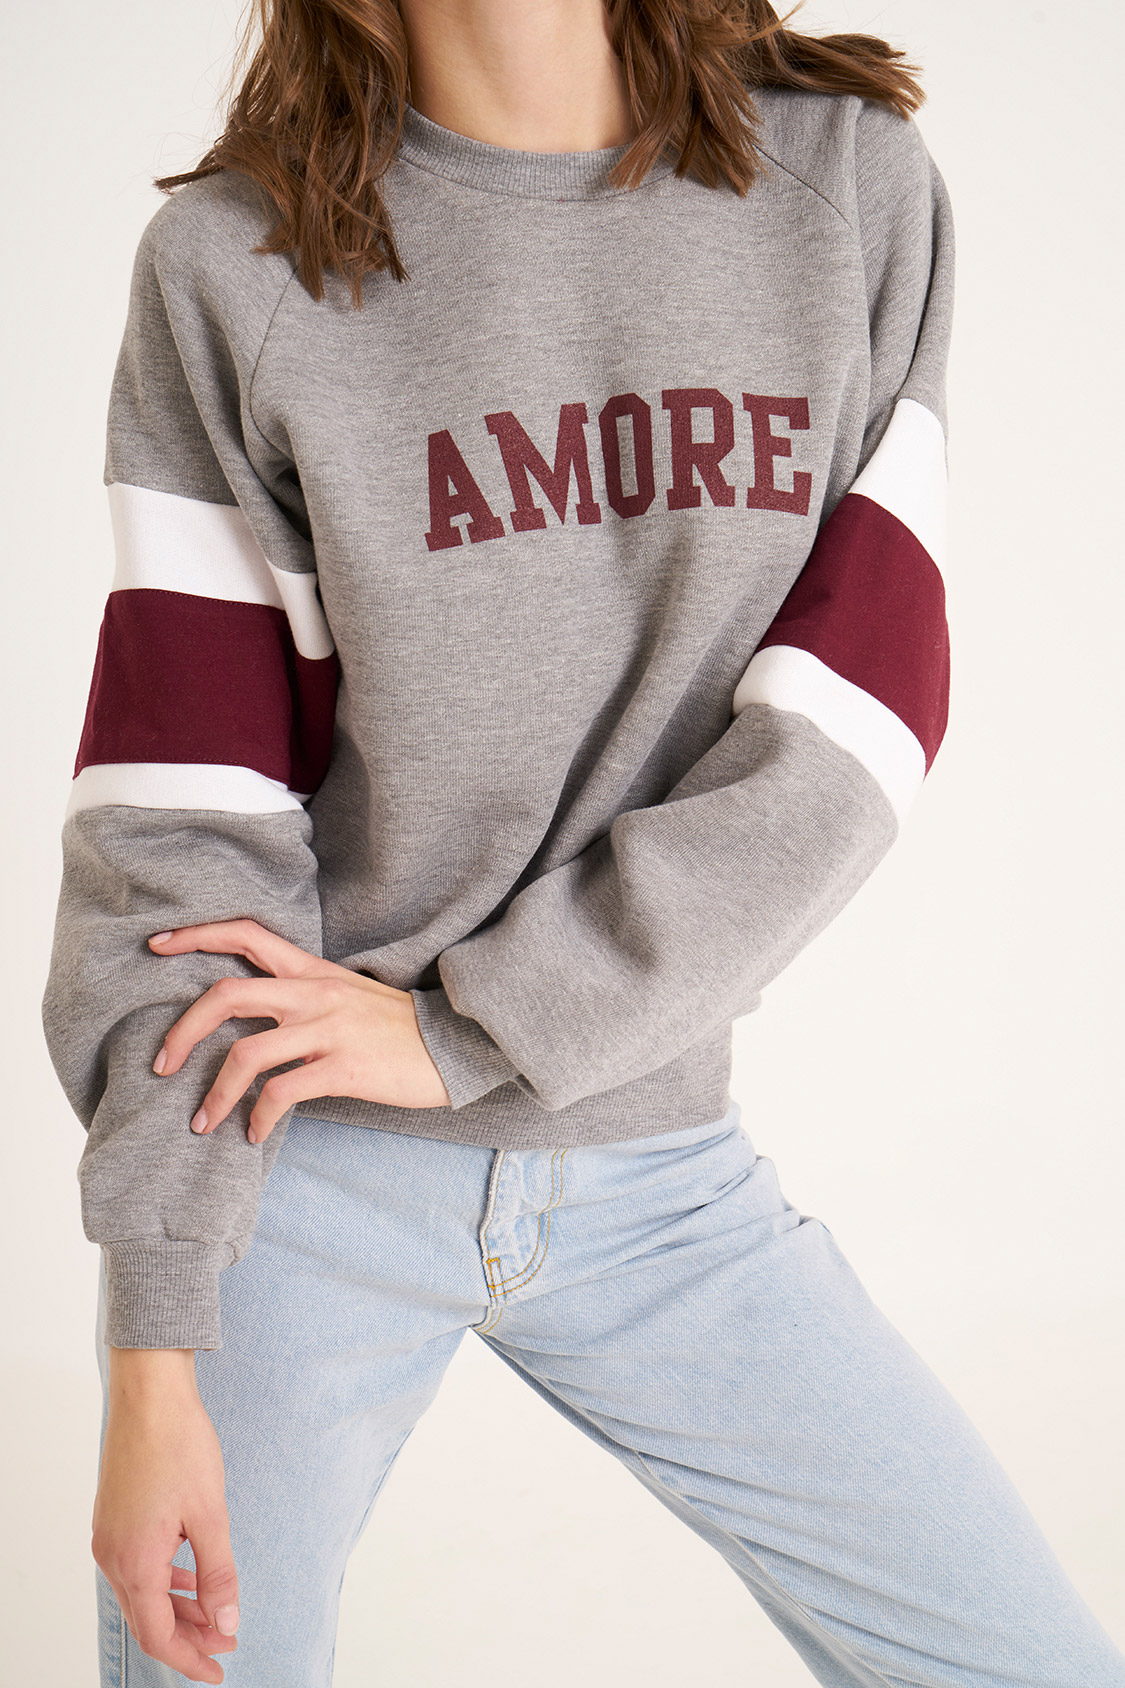 Pull sportif amore